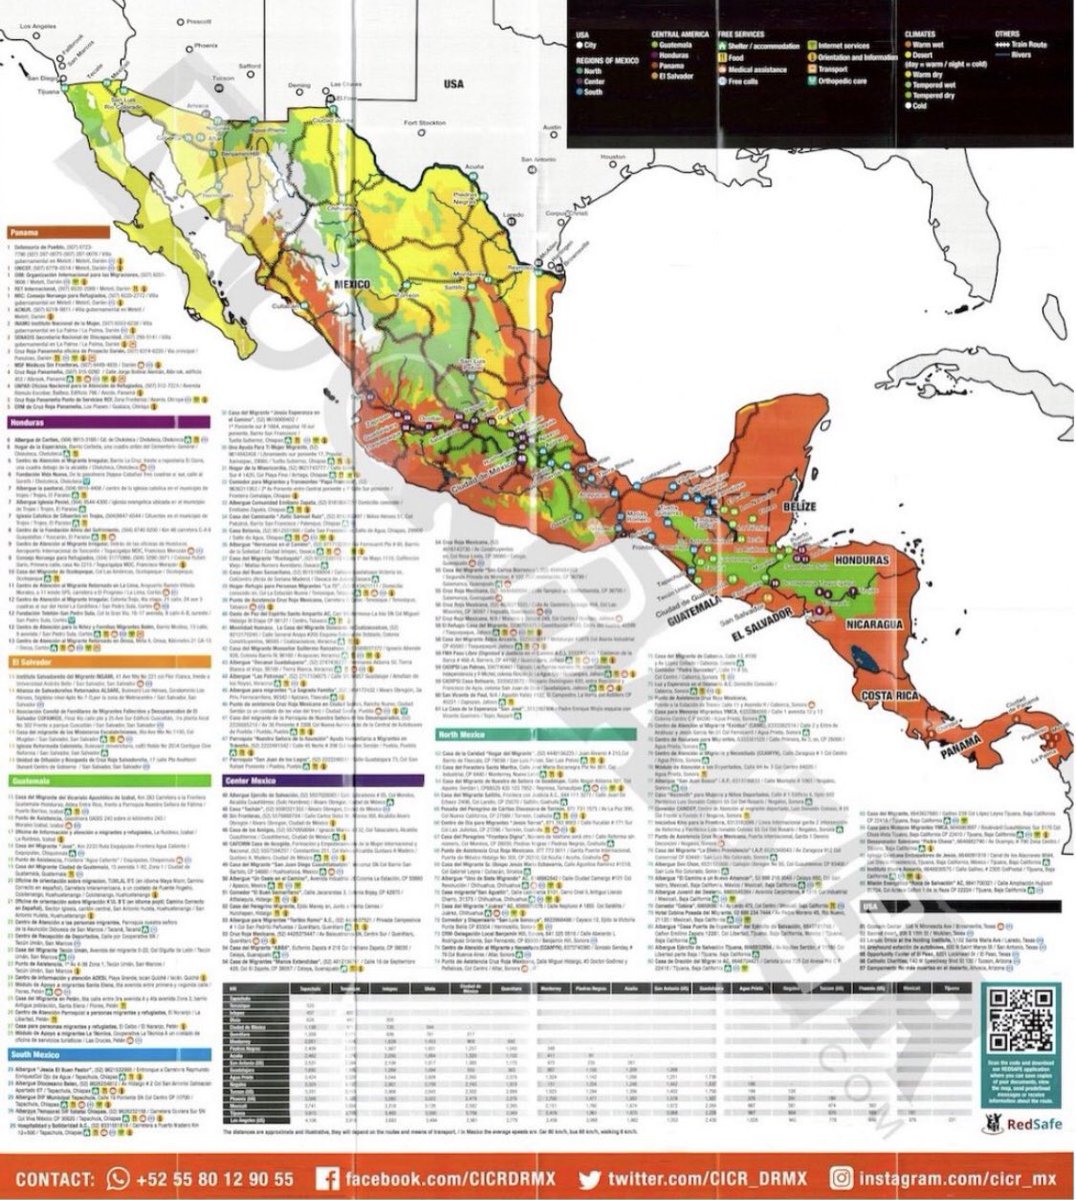 @SenJoniErnst “Nothing illustrates more vividly how U.S.-funded UN agencies and NGOs facilitate illegal mass migration than the large, full-color folding maps disclosed by MUCKRAKER that detail the routes to take to the U.S. and where to cross the U.S. border.” 👀